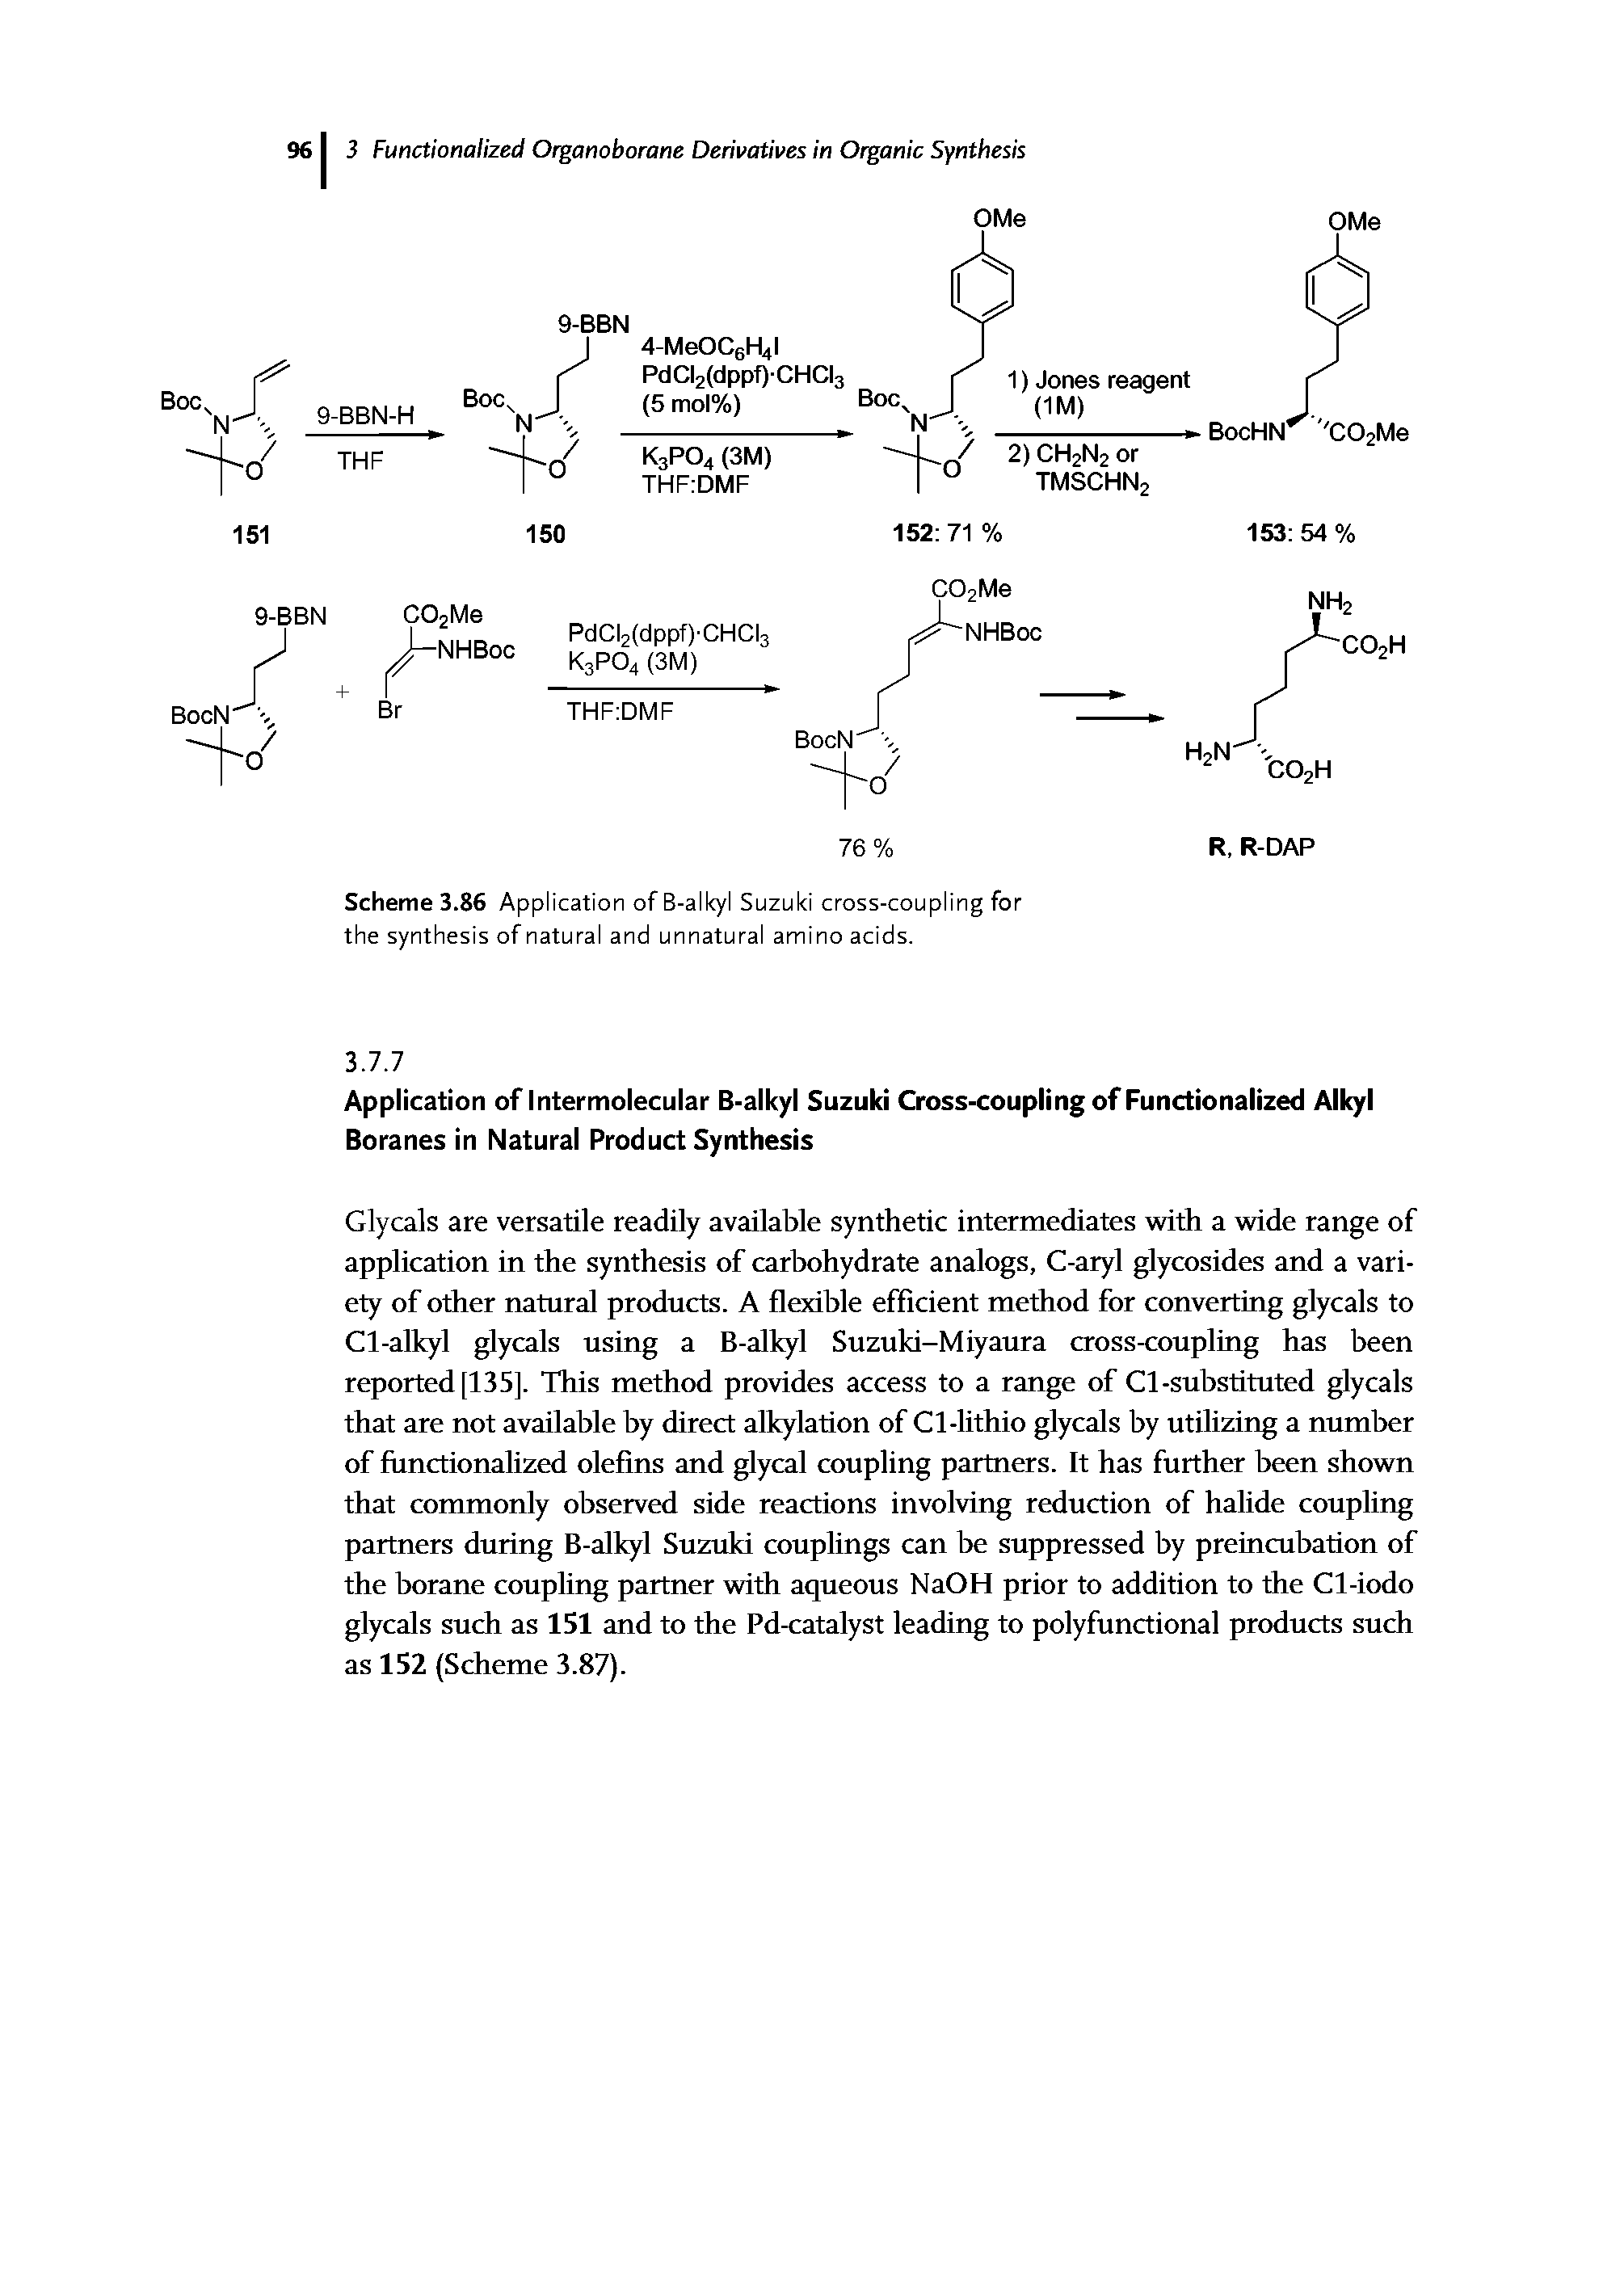 Scheme 3.86 Application of B-alkyl Suzuki cross-coupling for the synthesis of natural and unnatural amino acids.